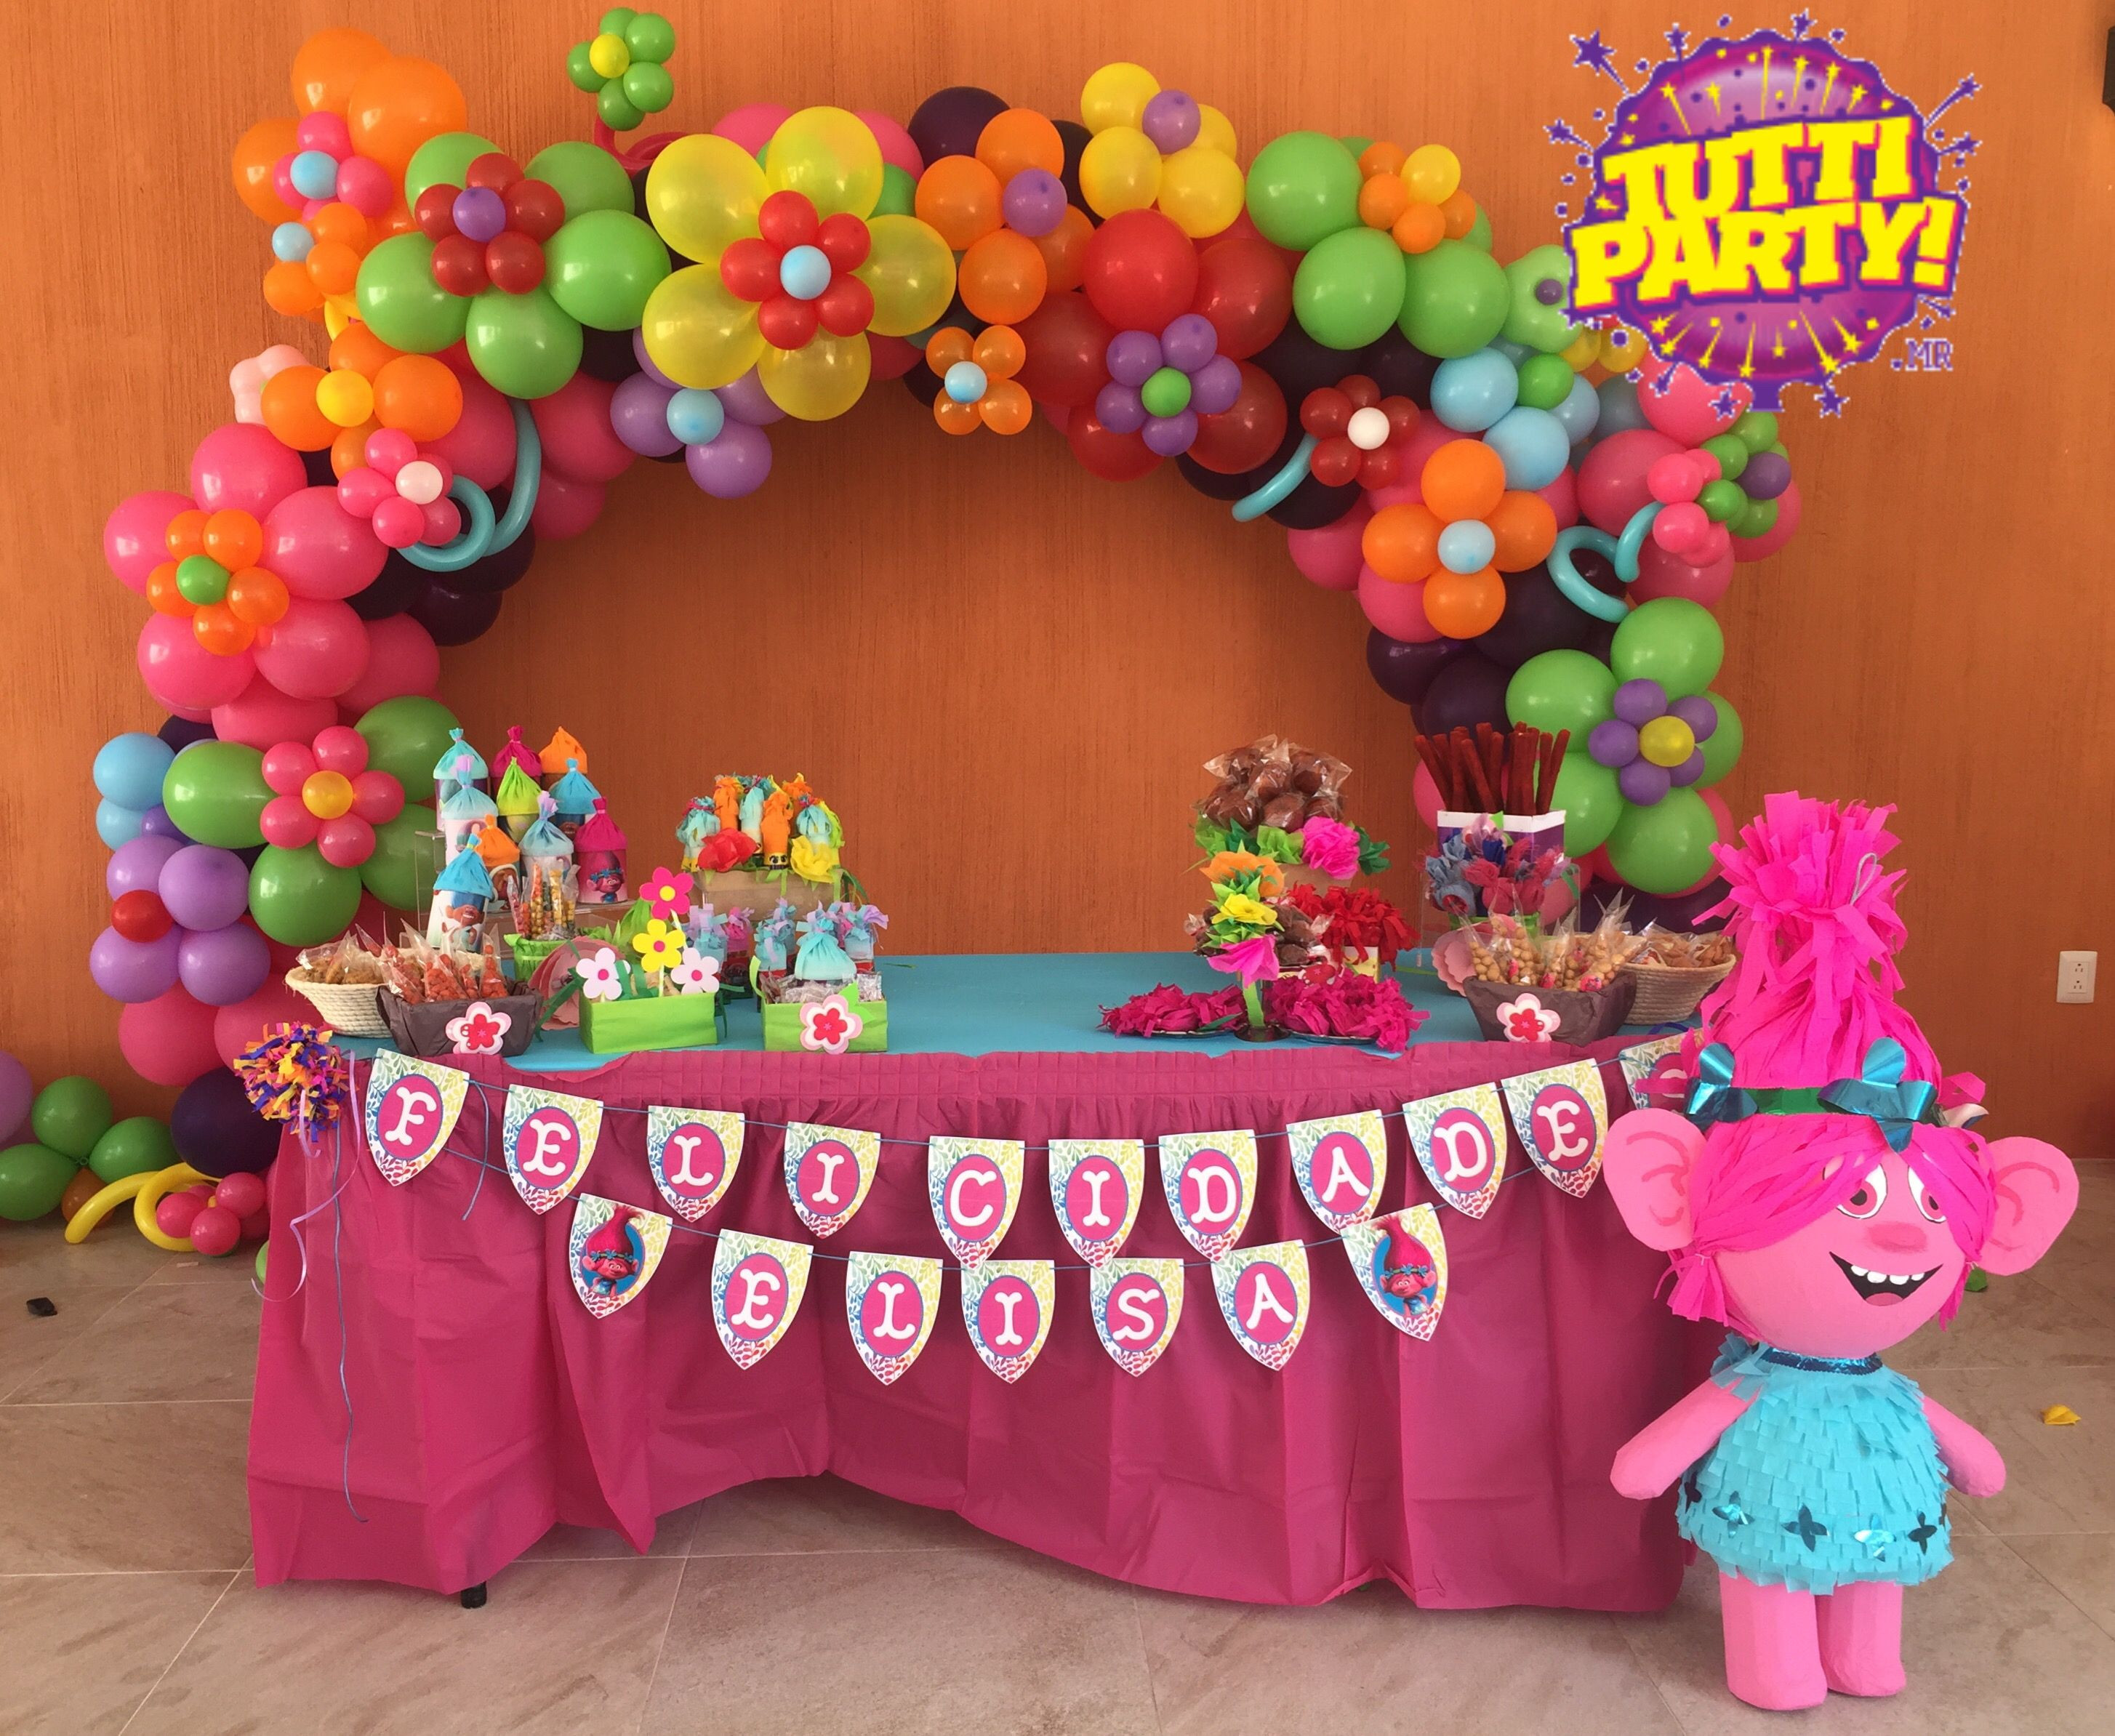 Trolls Party Ideas Party City
 Southern Blue Celebrations TROLL PARTY IDEAS